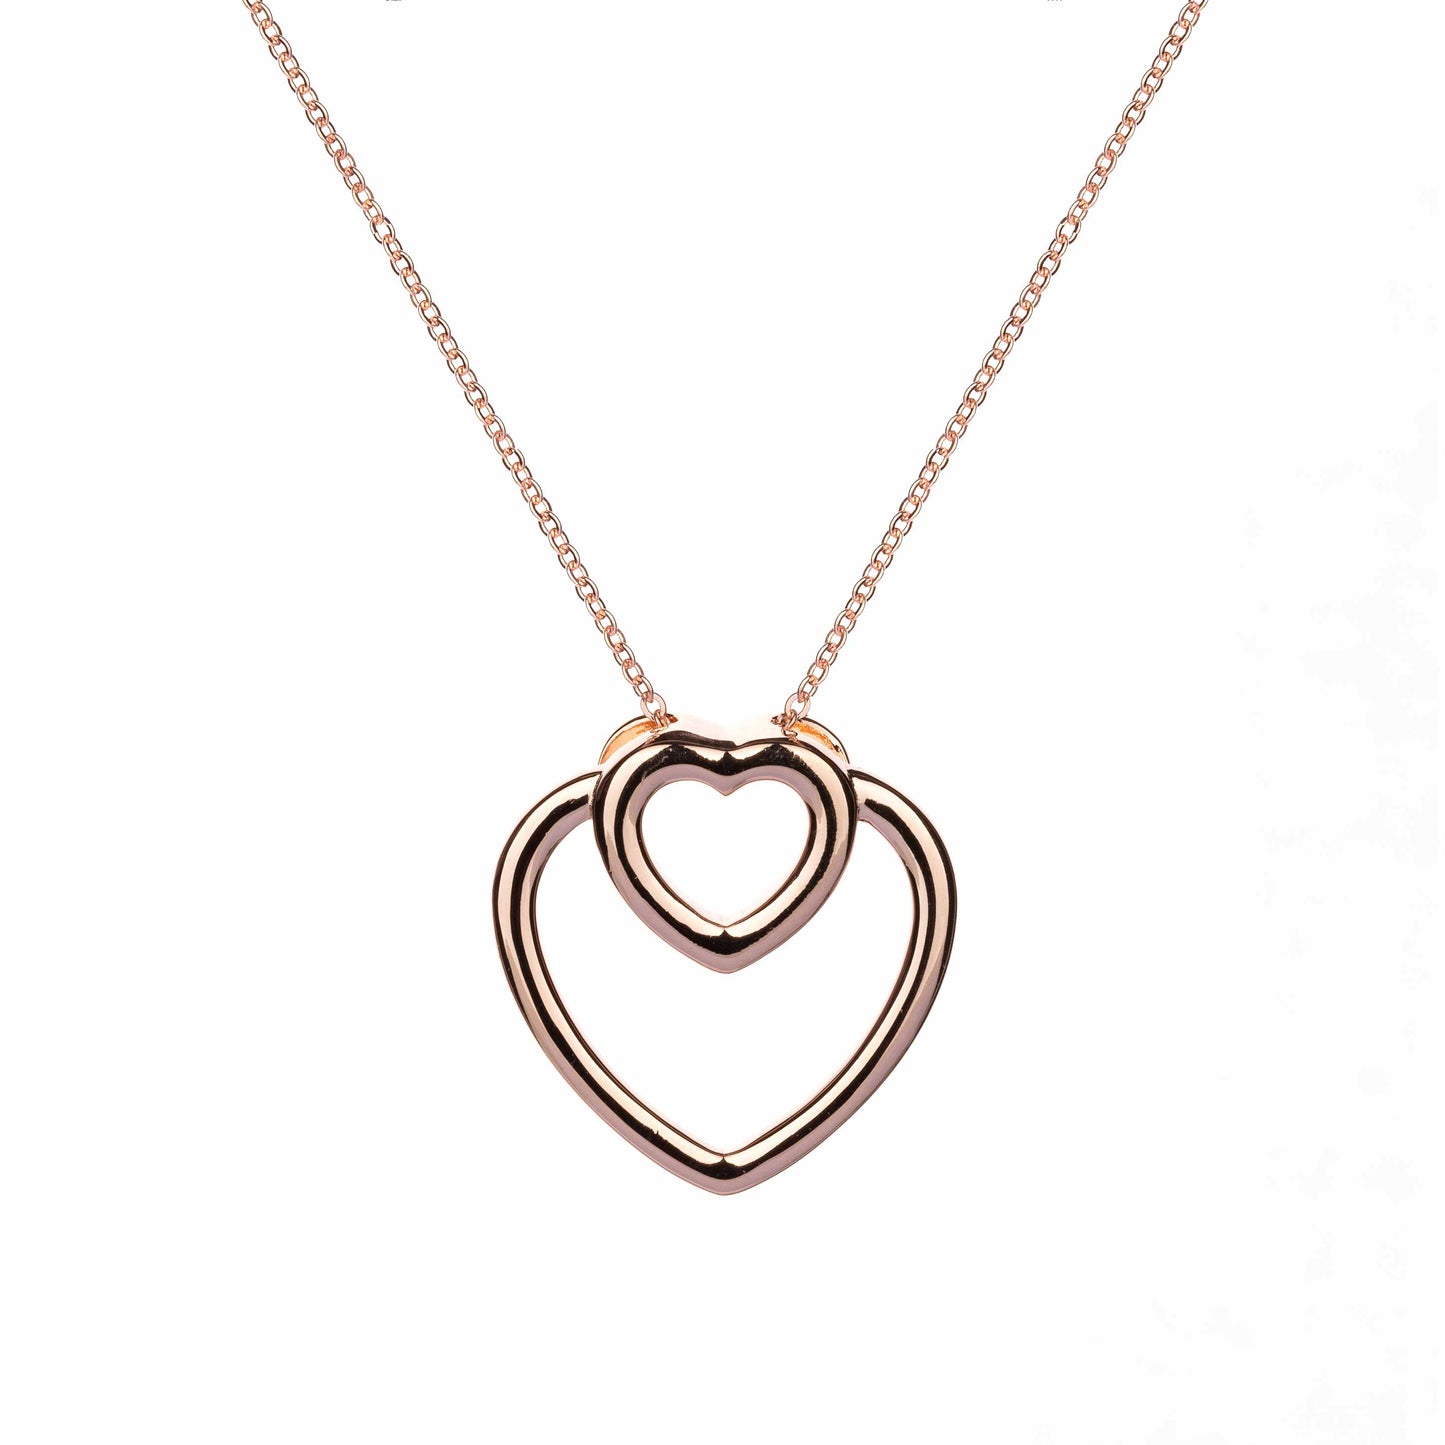 With Love - Dual Hearts - Necklace